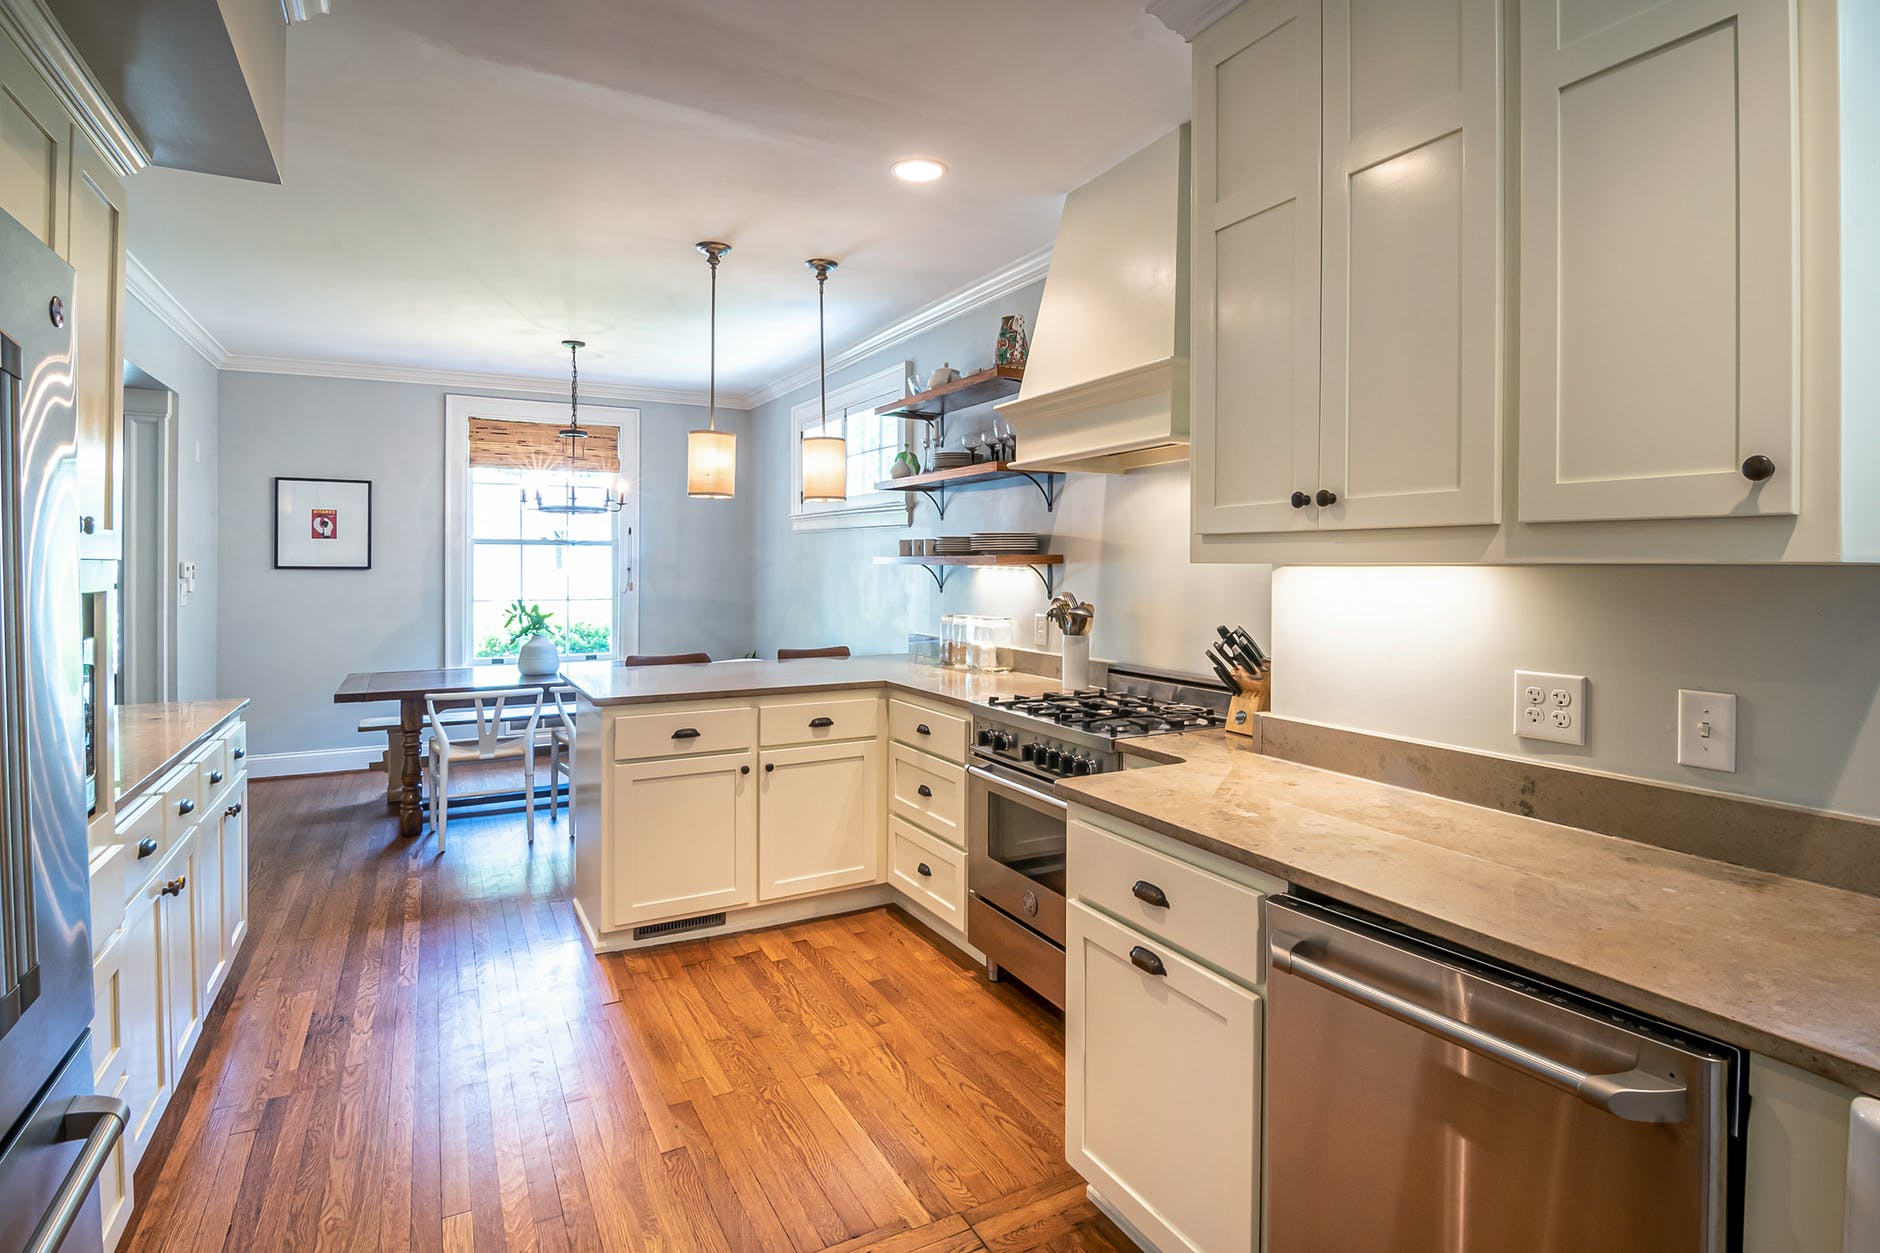 Why Should You Work with Professionals When Building a Kitchen? – Home